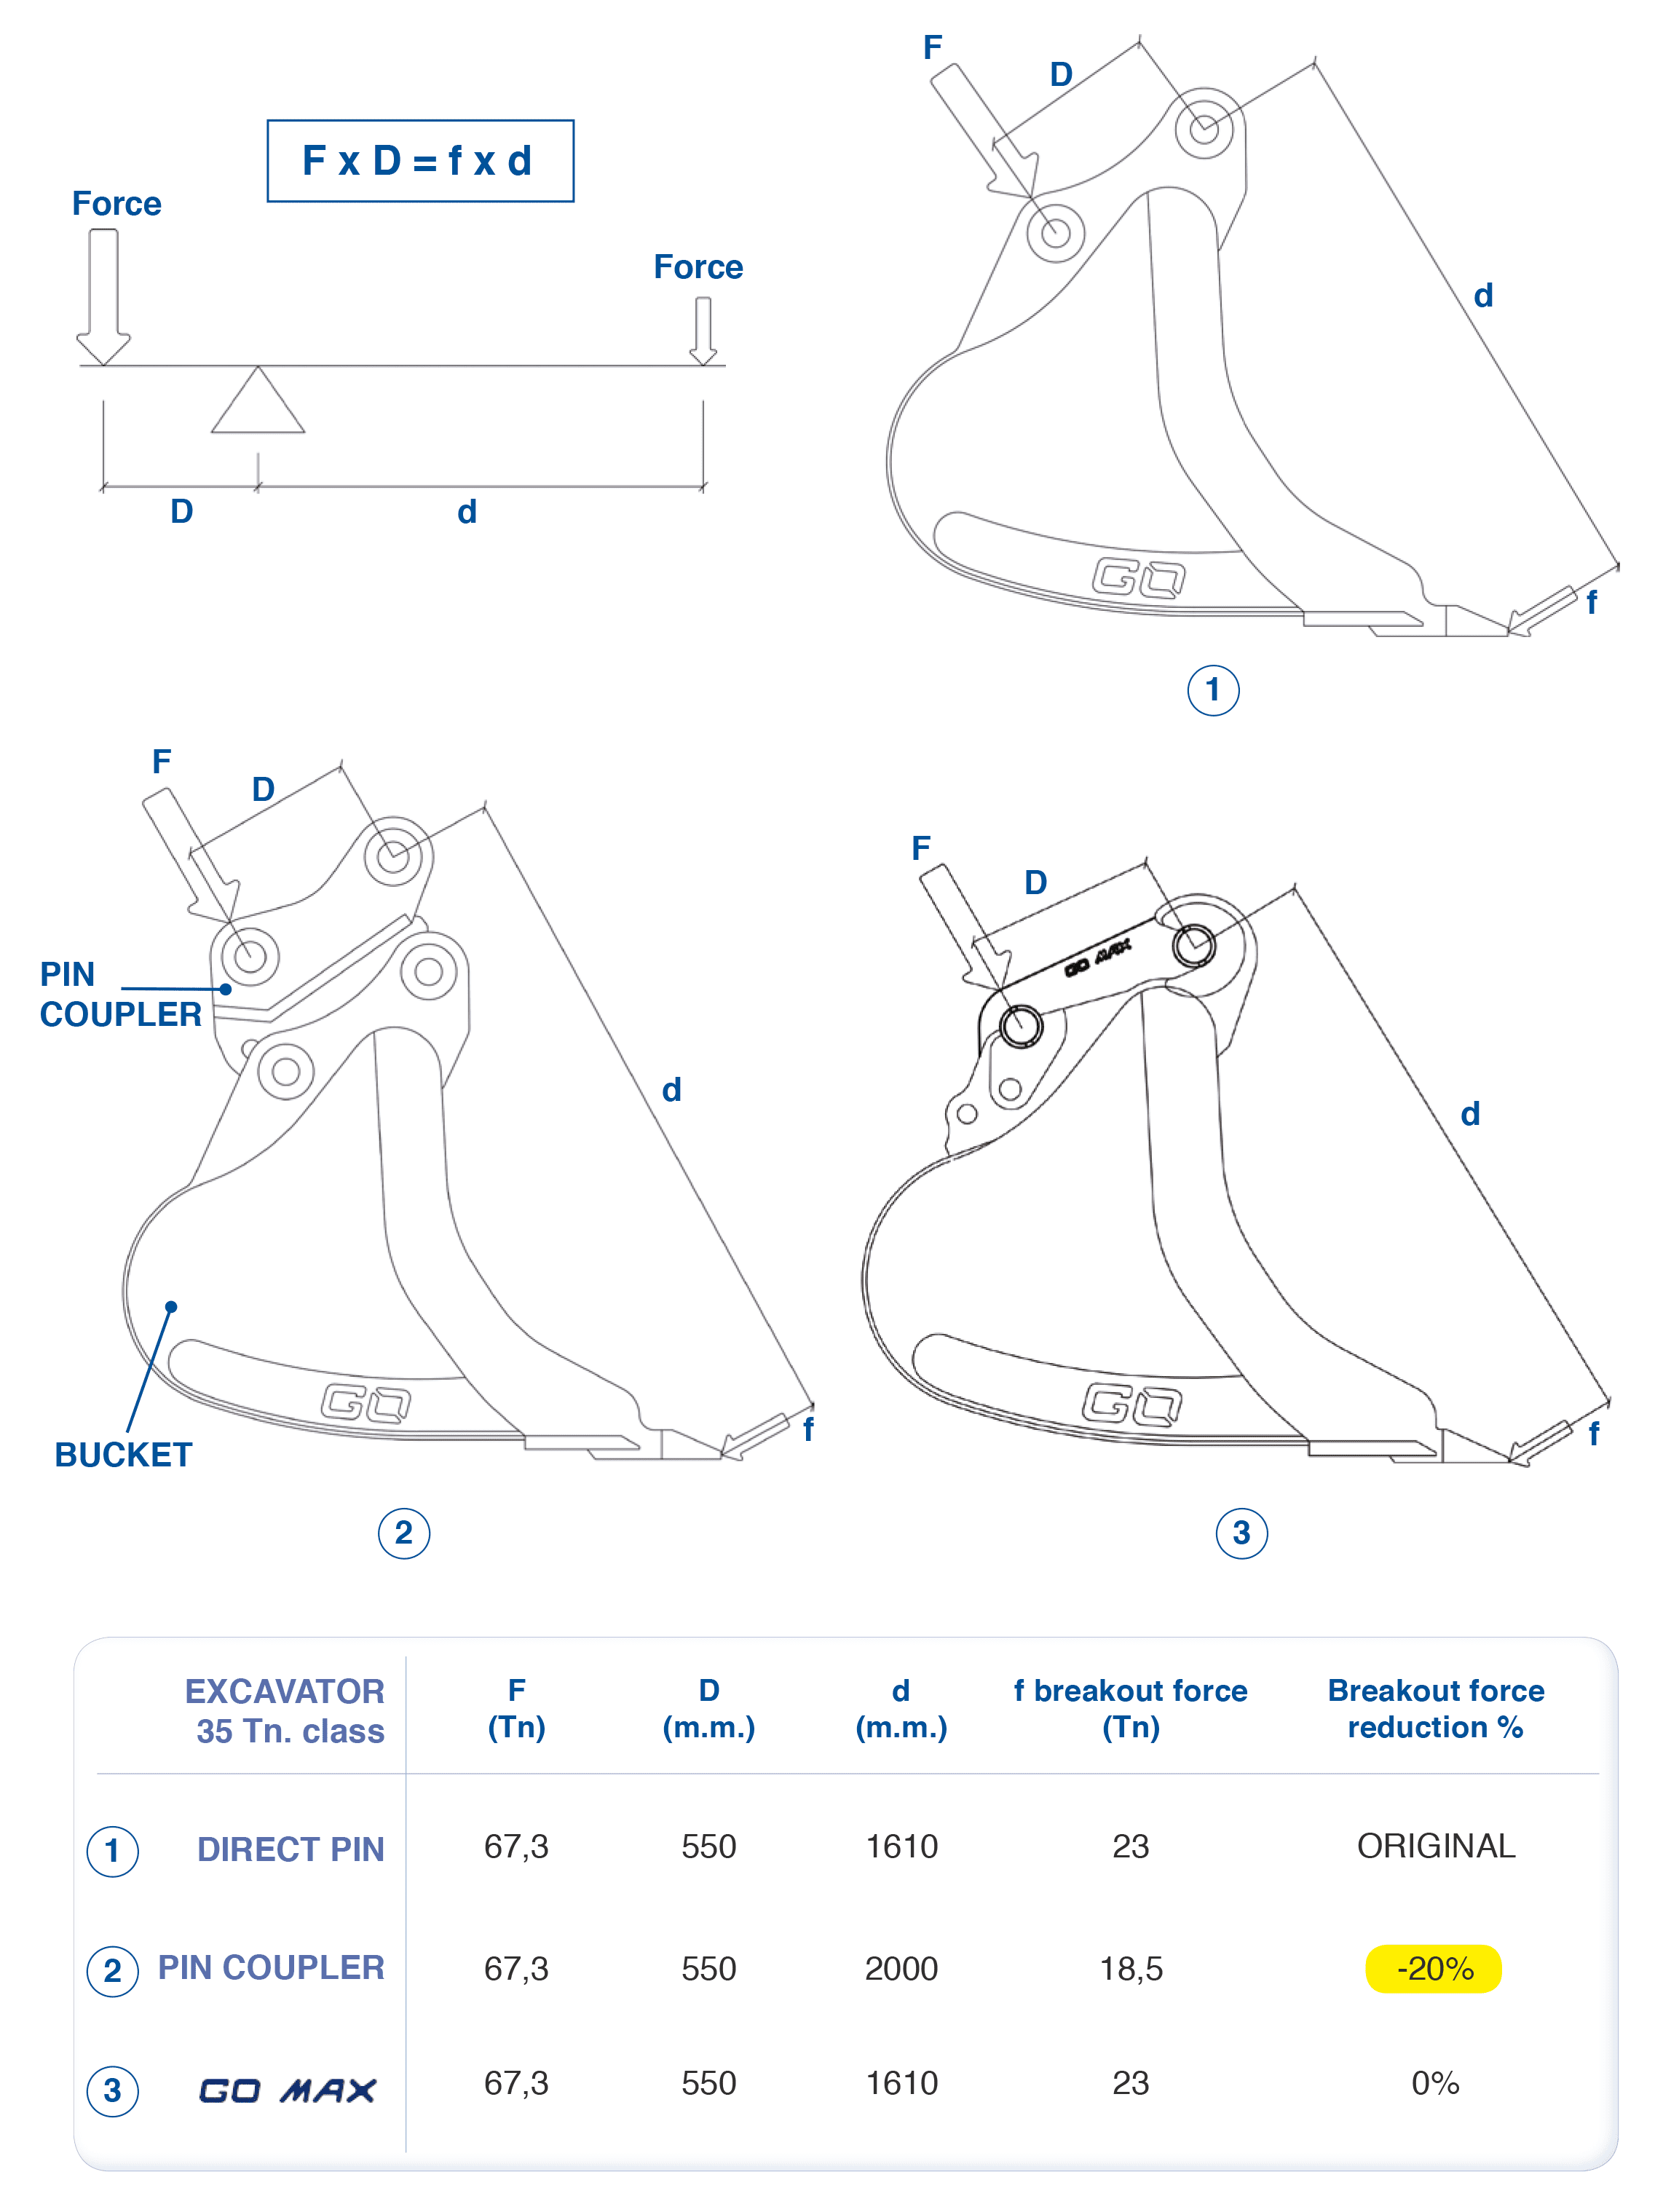 Pictures and chart of the comparison between the GO MAX and other couplers, regarding the force